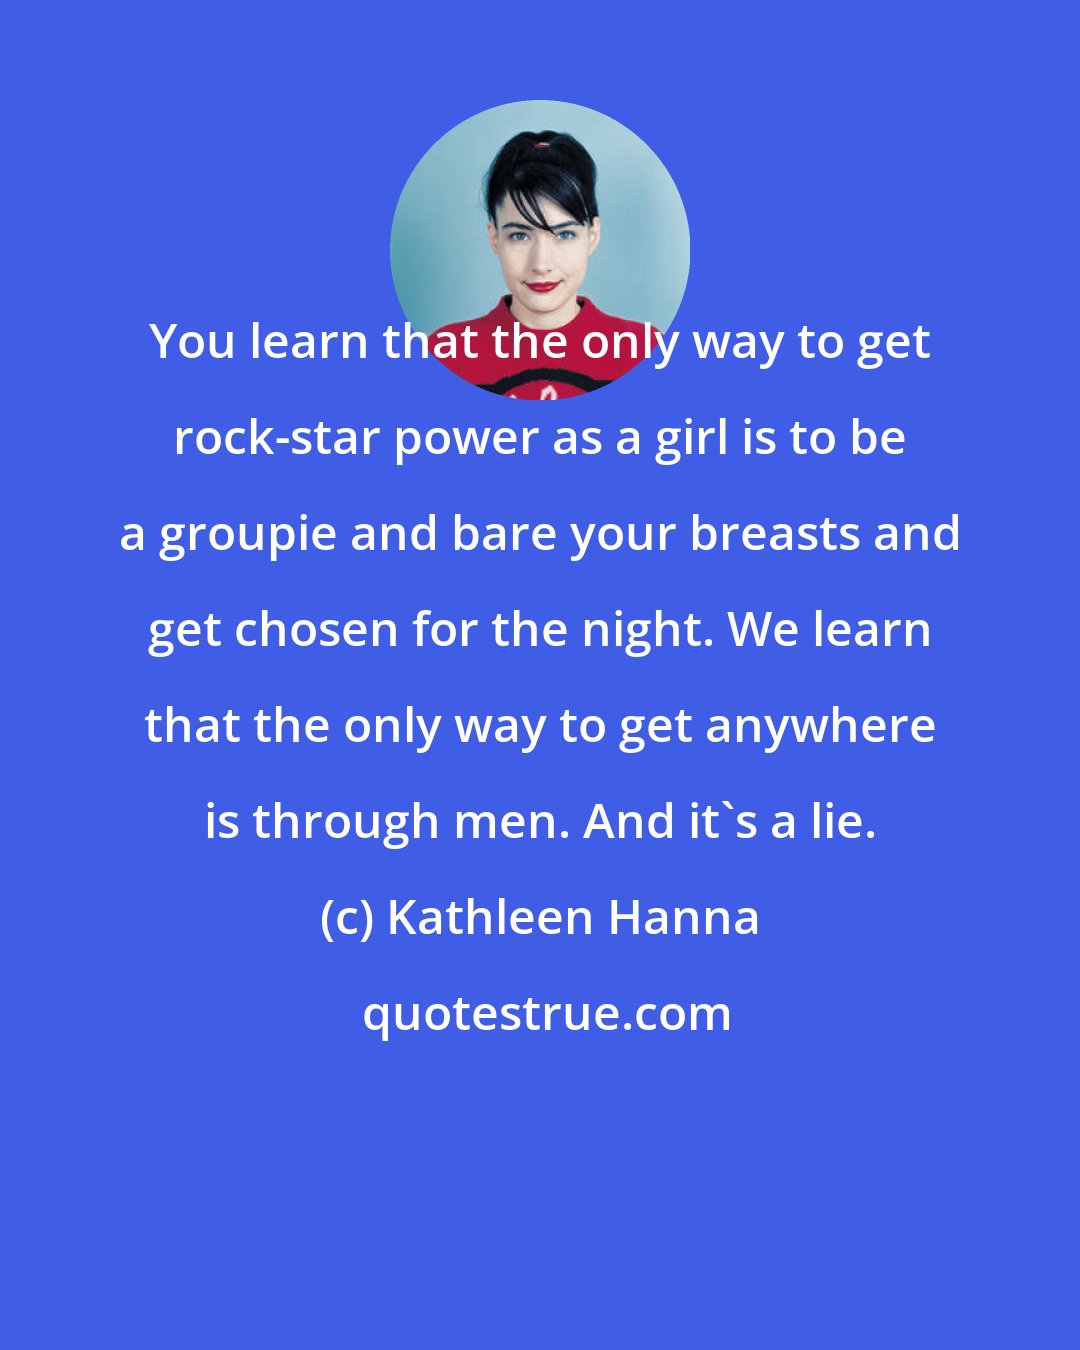 Kathleen Hanna: You learn that the only way to get rock-star power as a girl is to be a groupie and bare your breasts and get chosen for the night. We learn that the only way to get anywhere is through men. And it's a lie.